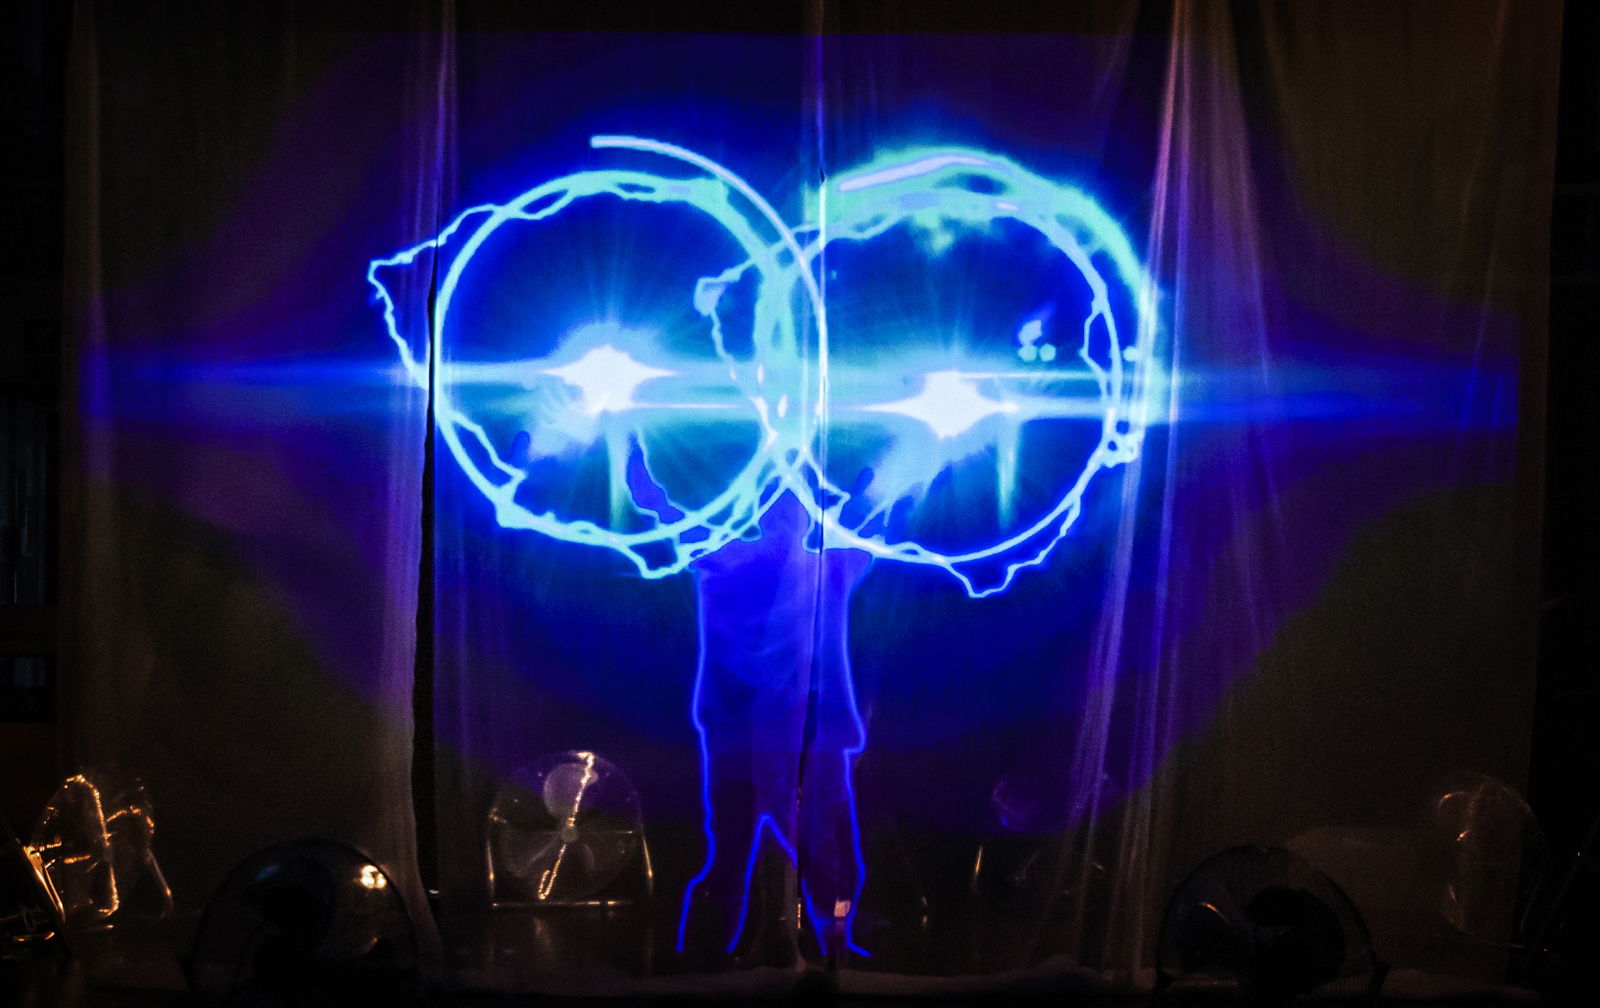 a photo from the performance, with Aakash standing behind a screen, projecting two rings of blue electric light from his outstretched hands